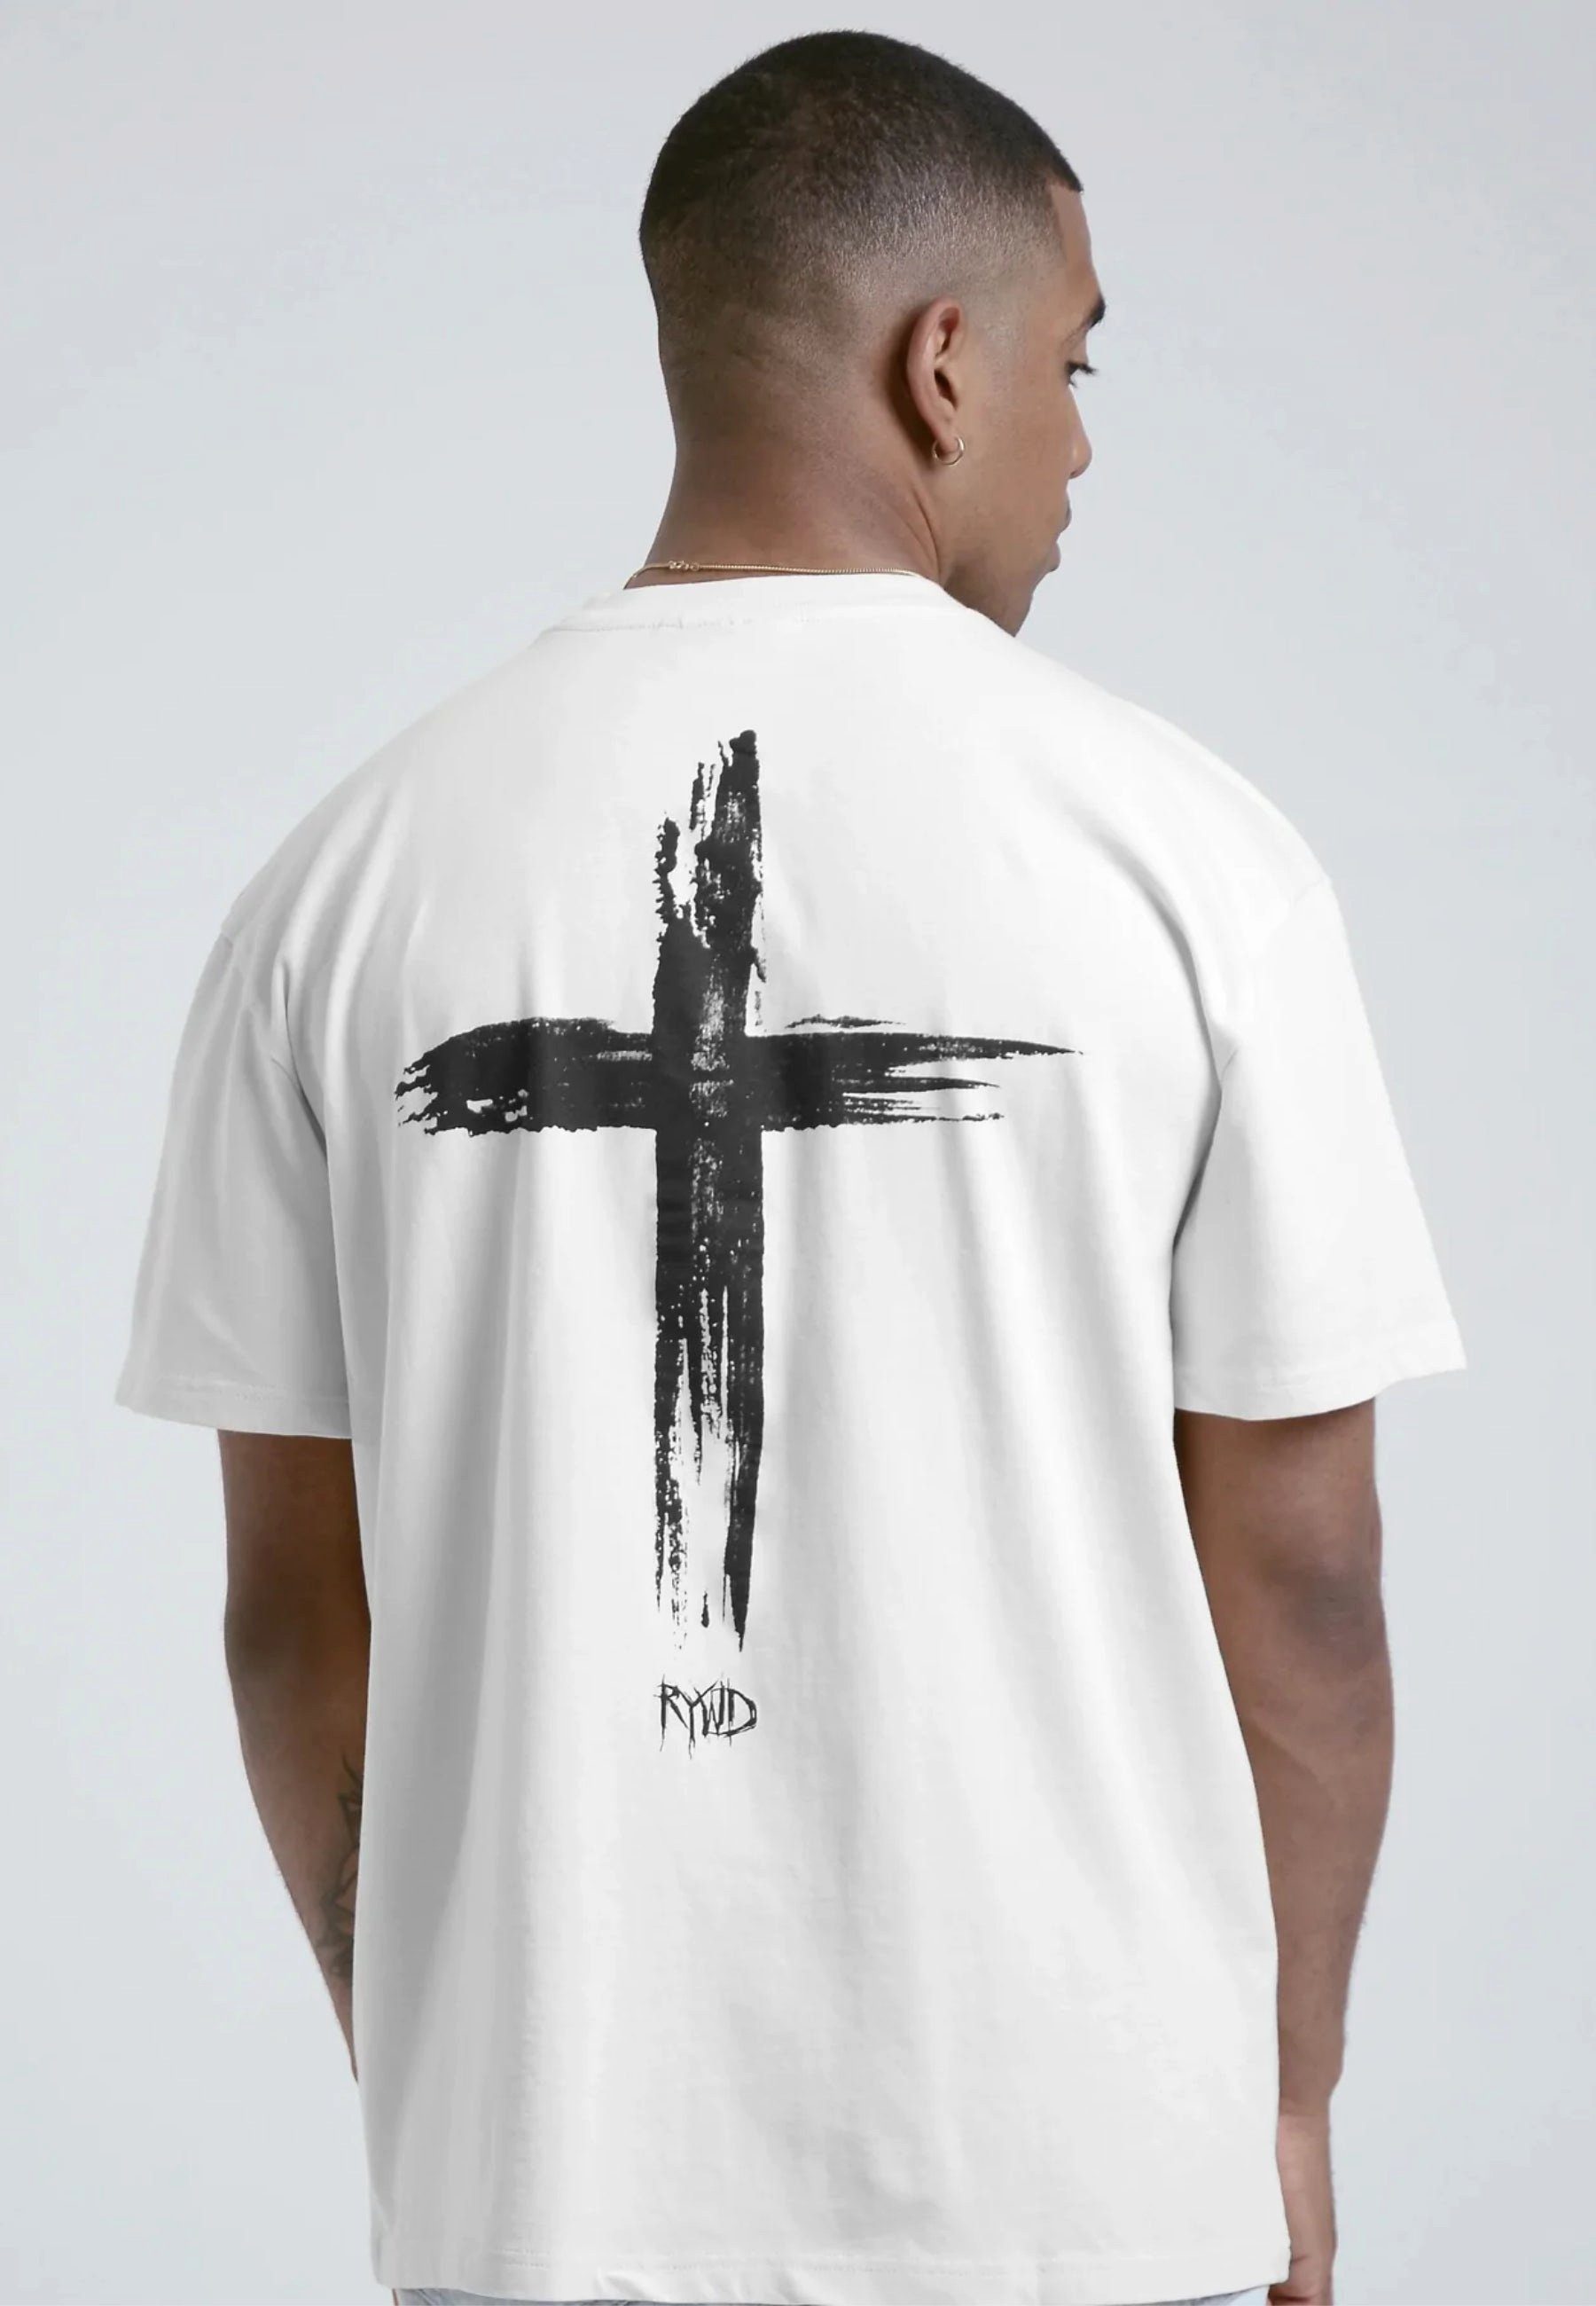 Remember will T-Shirt Cross RYWD die Weiss you T-Shirt -